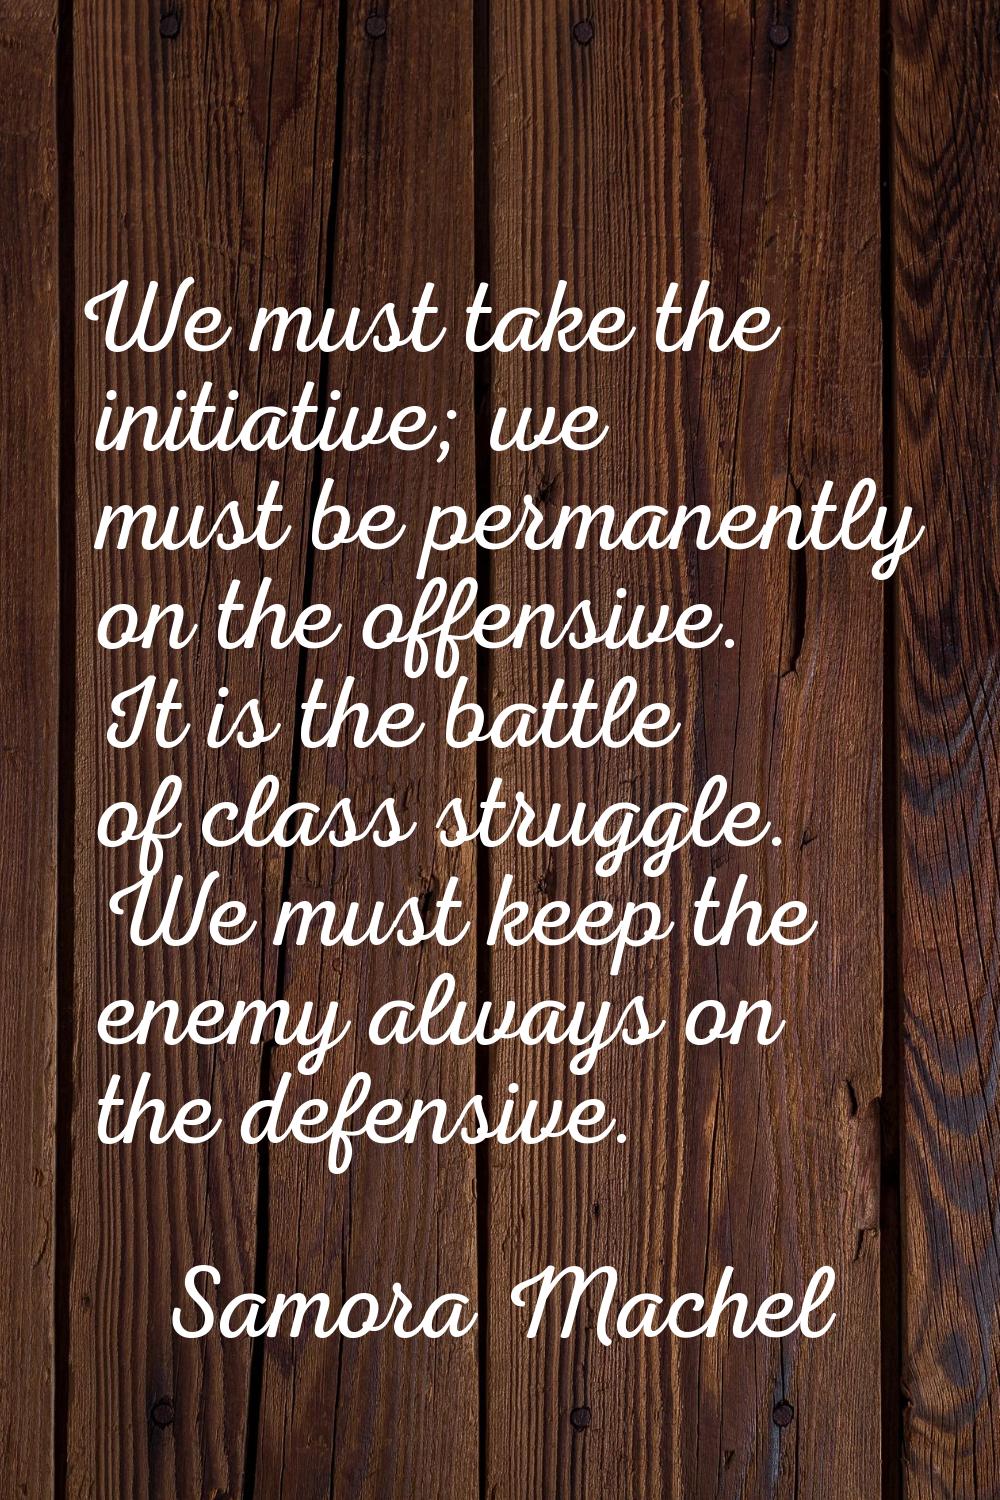 We must take the initiative; we must be permanently on the offensive. It is the battle of class str